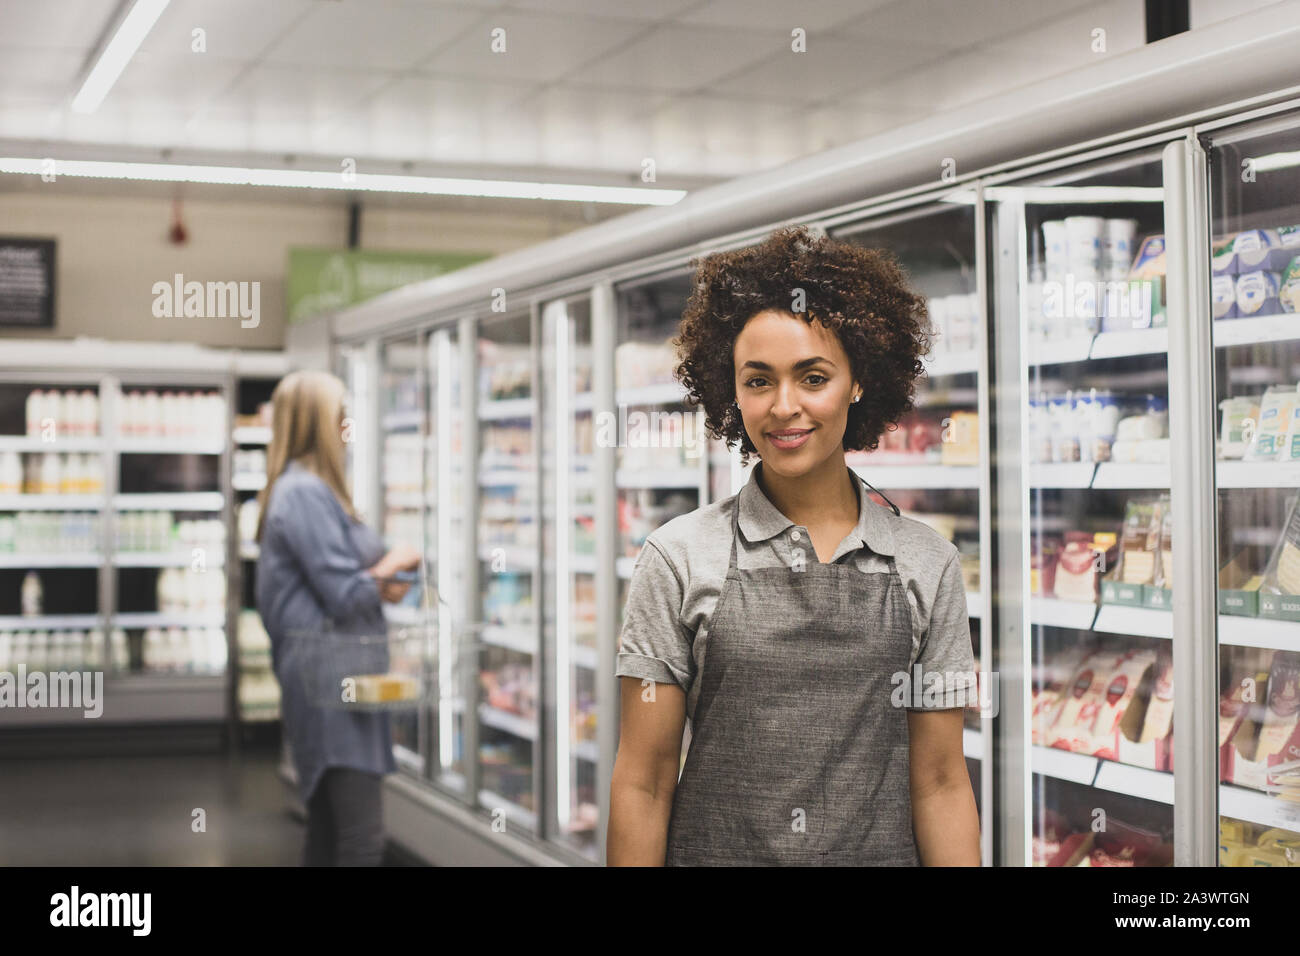 Portrait of grocery store sales assistant Stock Photo